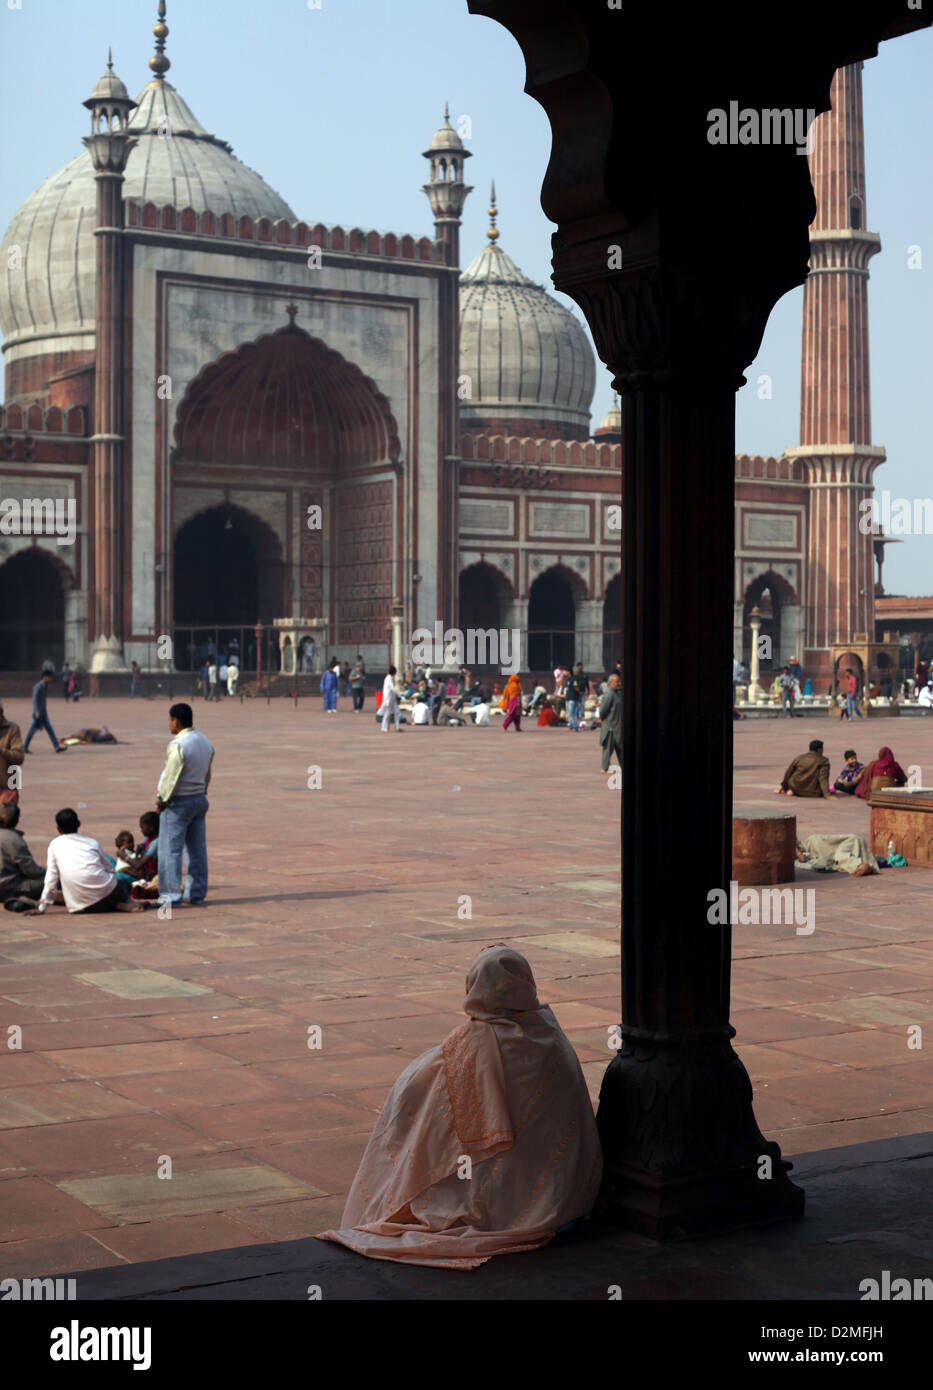 General view of visitors at the Jama Masjid mosque in New Delhi in India Stock Photo